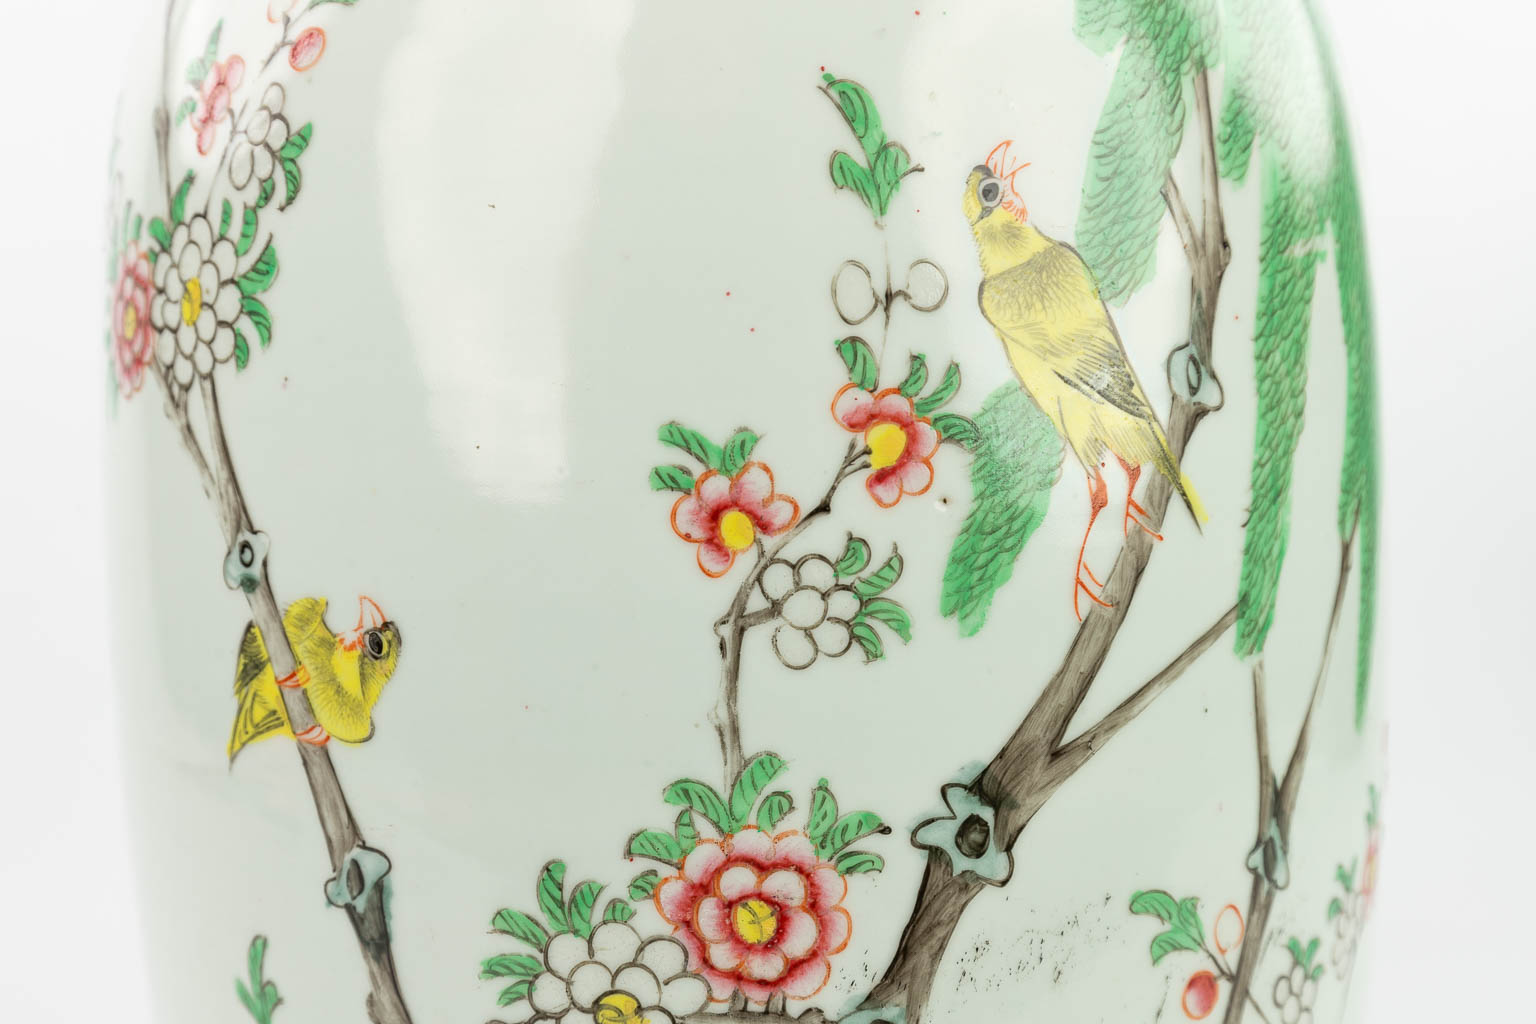 A Chinese vase made of porcelain and decorated with birds and branches. (H:58cm)